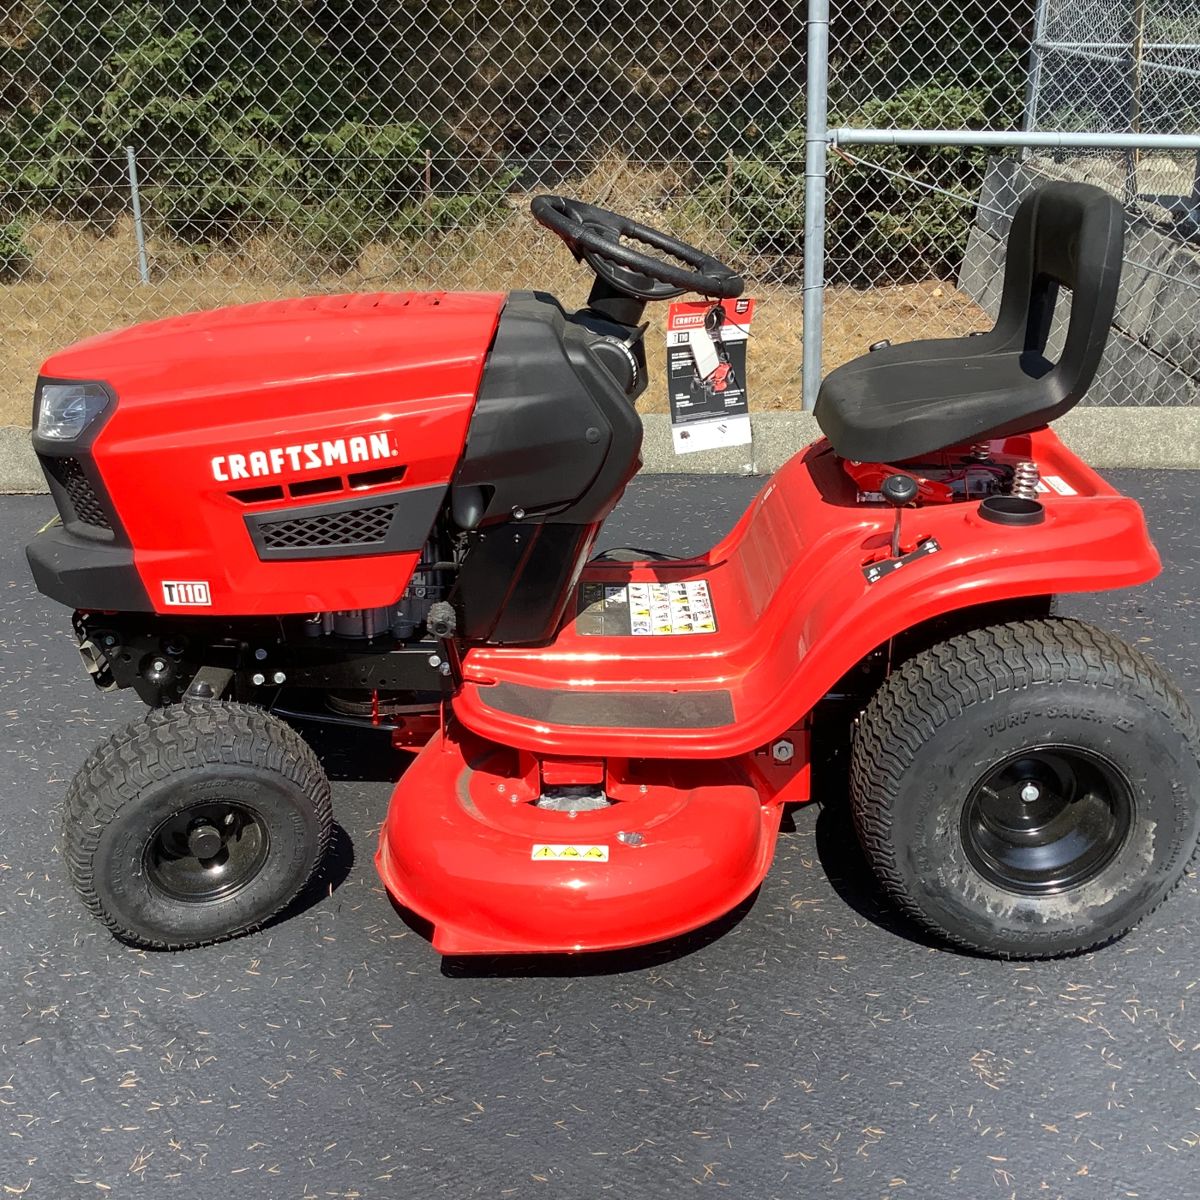 NEW - GICH037 CRAFTSMAN T110 42-in 17.5-HP Riding Lawn Mower
POWERFUL ENGINE: 17.5 HP Briggs and Stratton® single-cylinder engine delivers easy starting and superior performance
MANUAL TRANSMISSION: 7-speed transmission